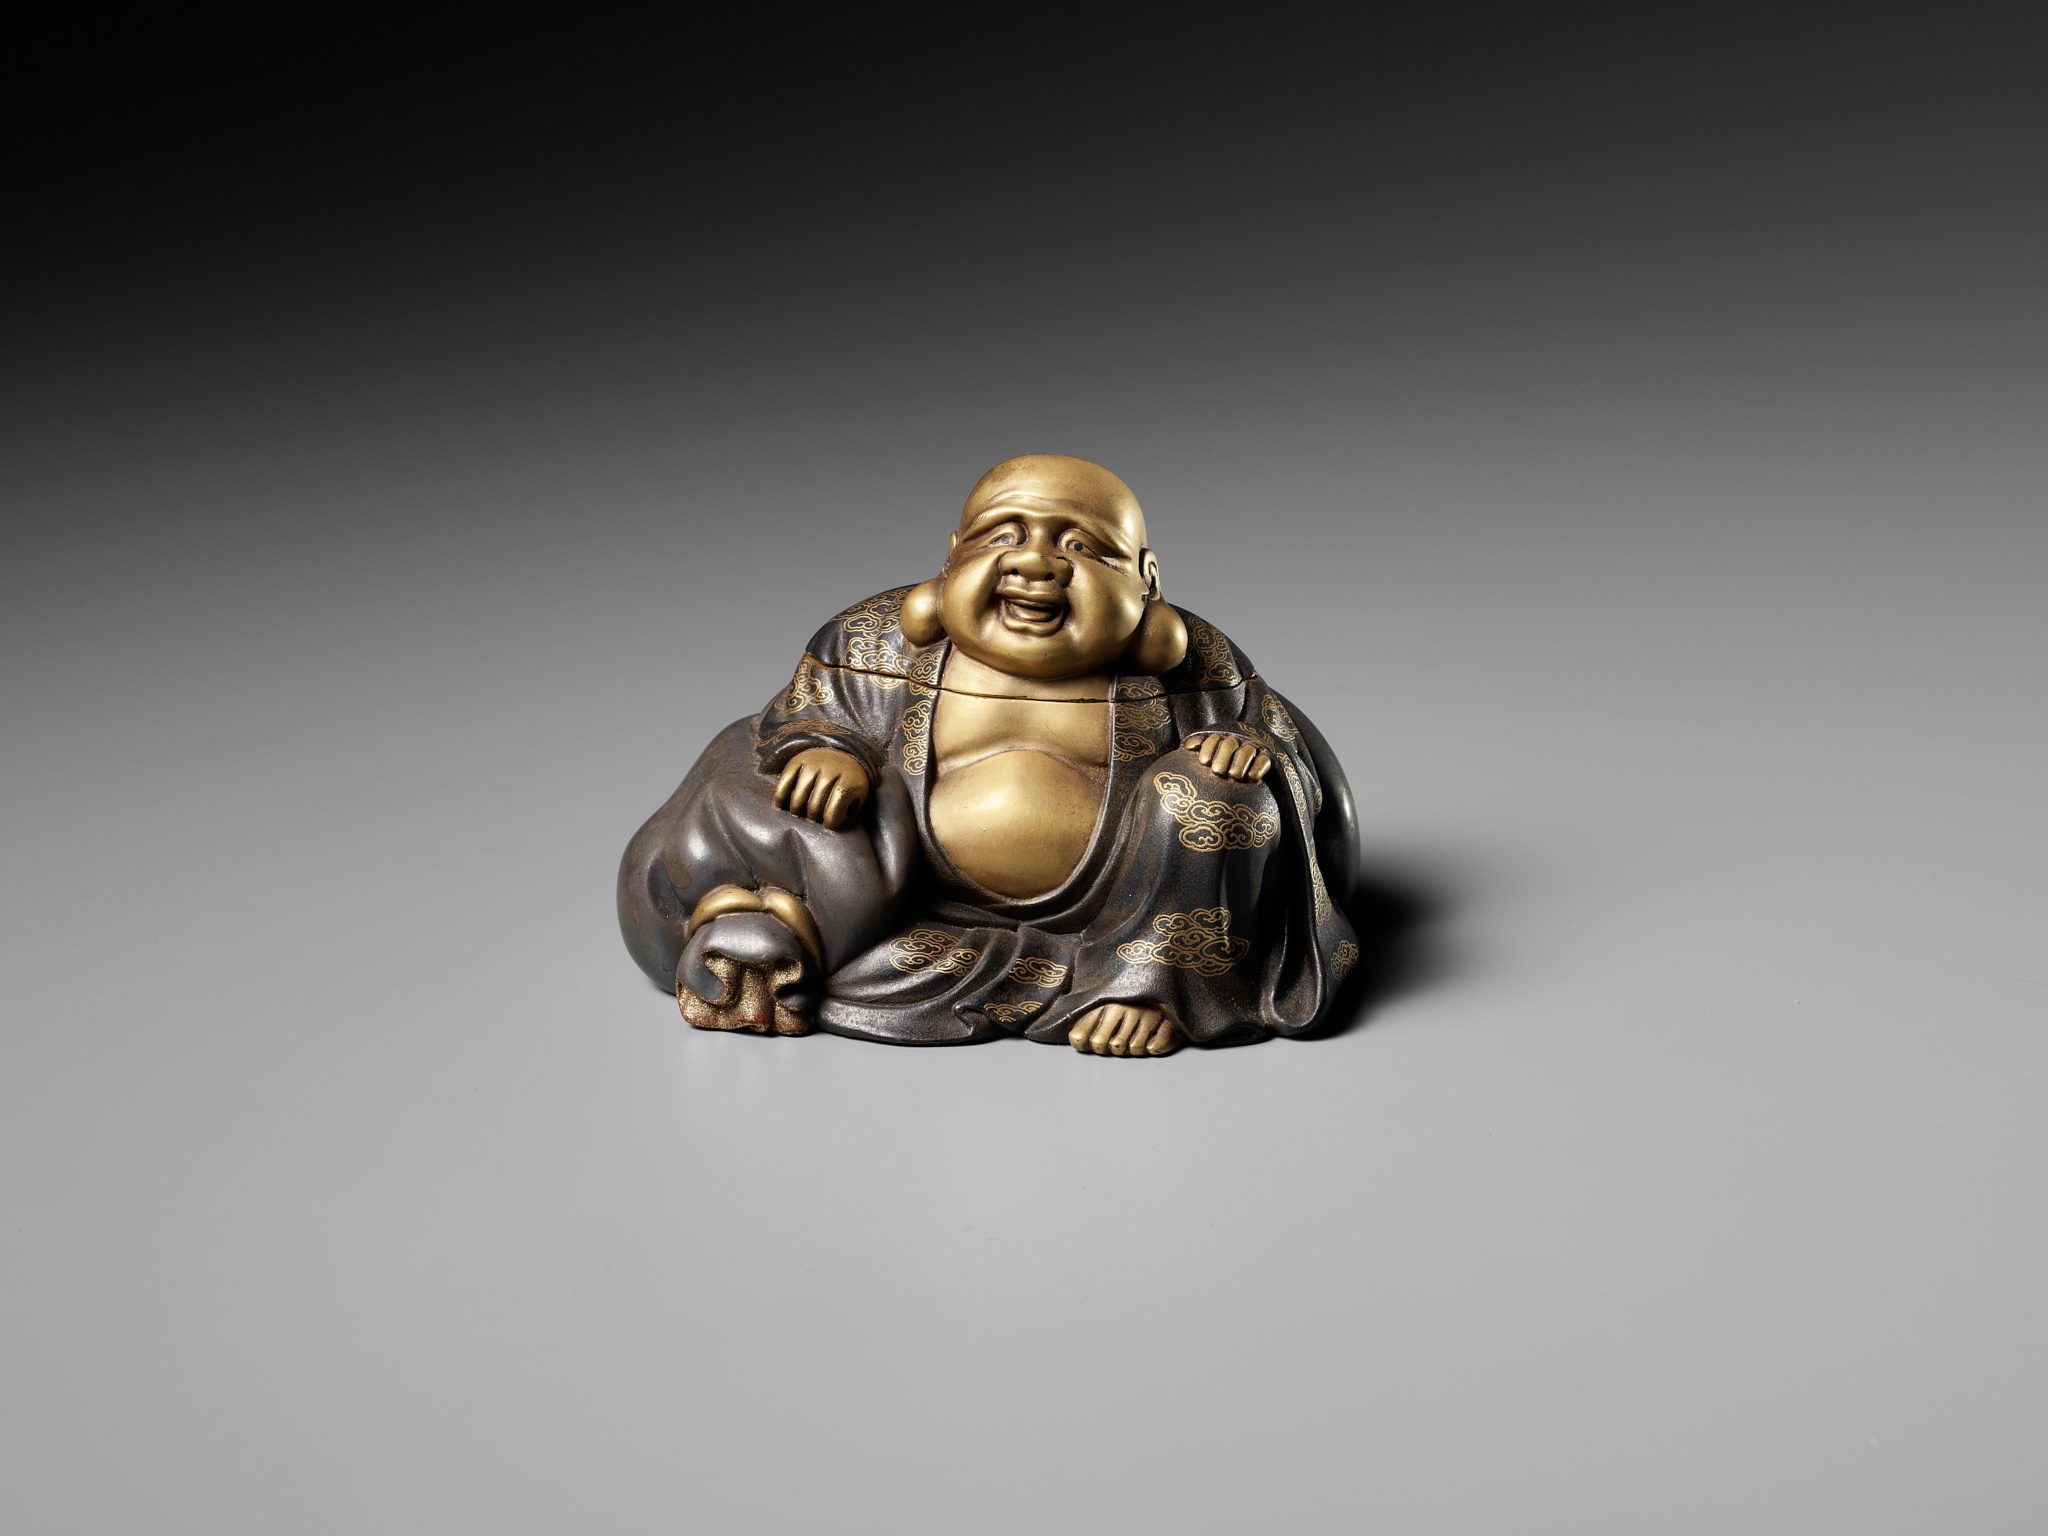 A FINE LACQUER KOGO (INCENSE BOX) AND COVER IN THE FORM OF HOTEI - Image 2 of 9